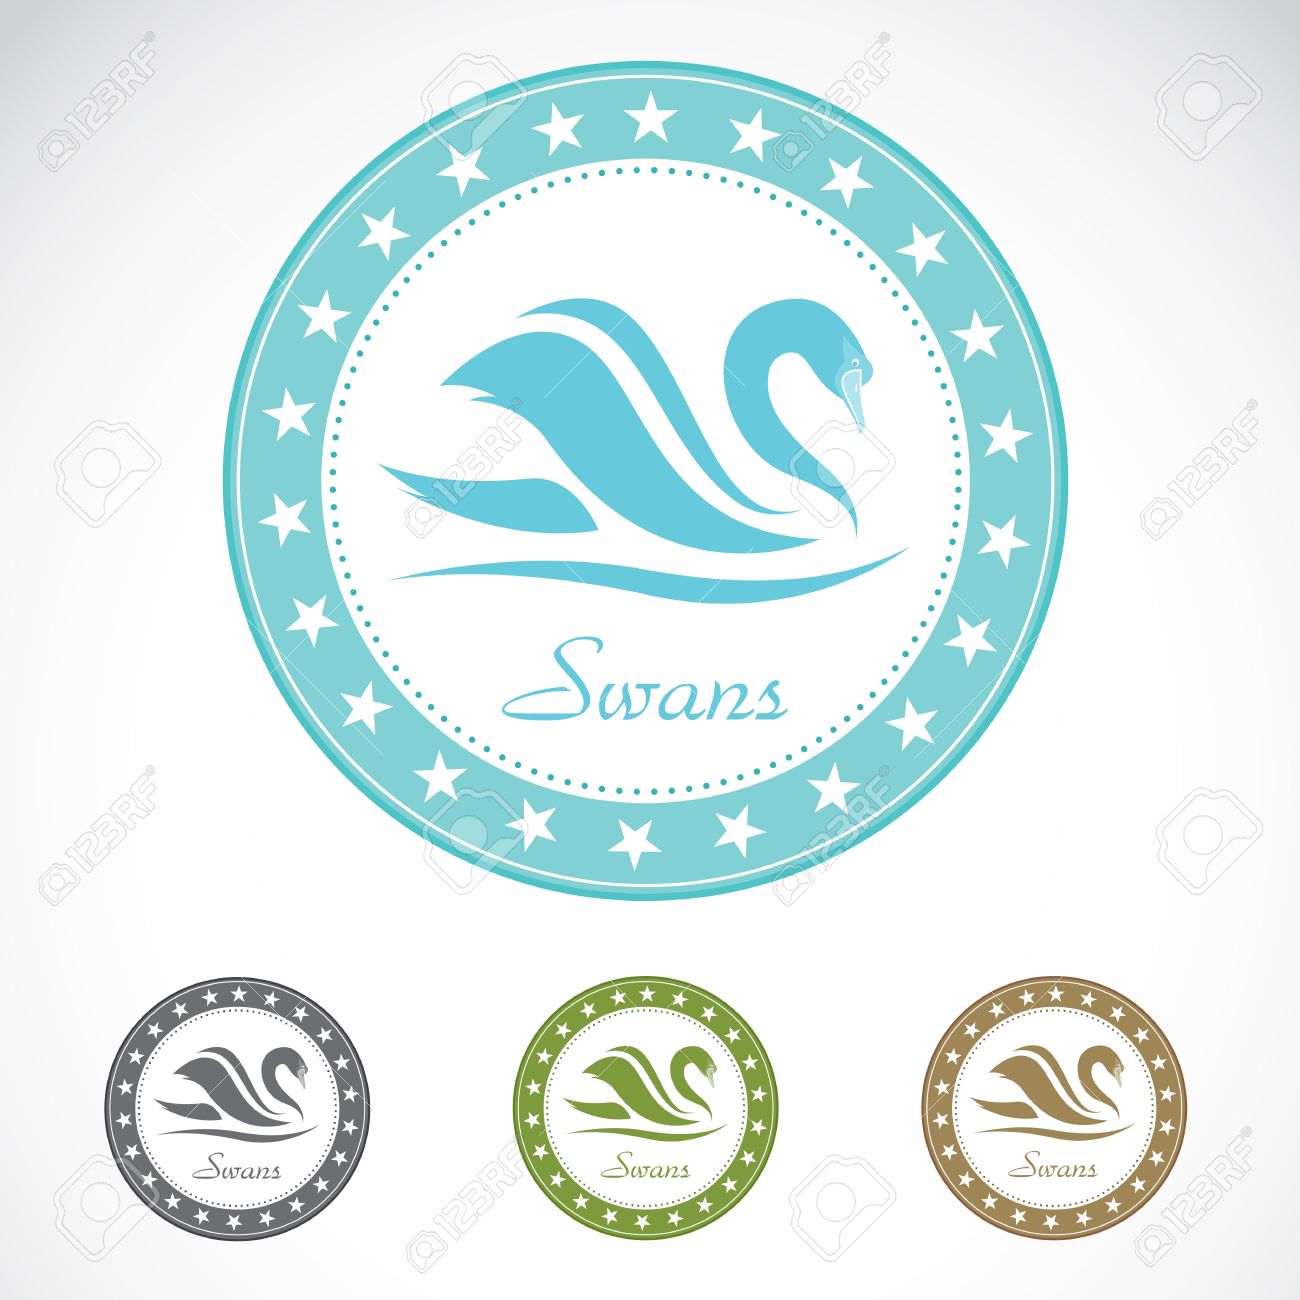 Set Of Vector Swan Label On White Background Royalty Free Cliparts.